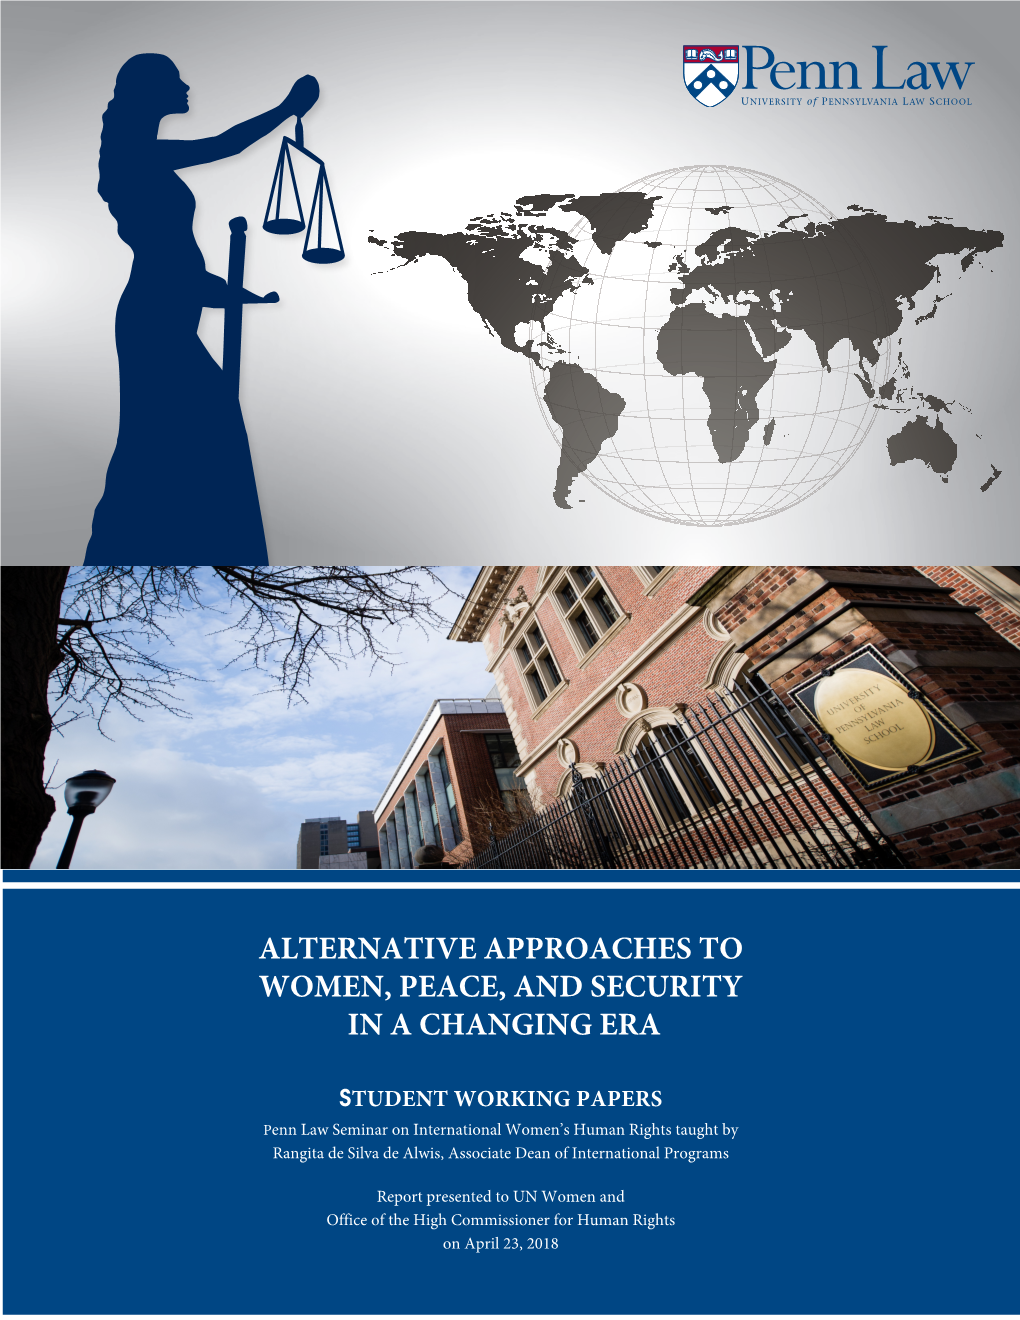 Alternative Approaches to Women, Peace, and Security in a Changing Era